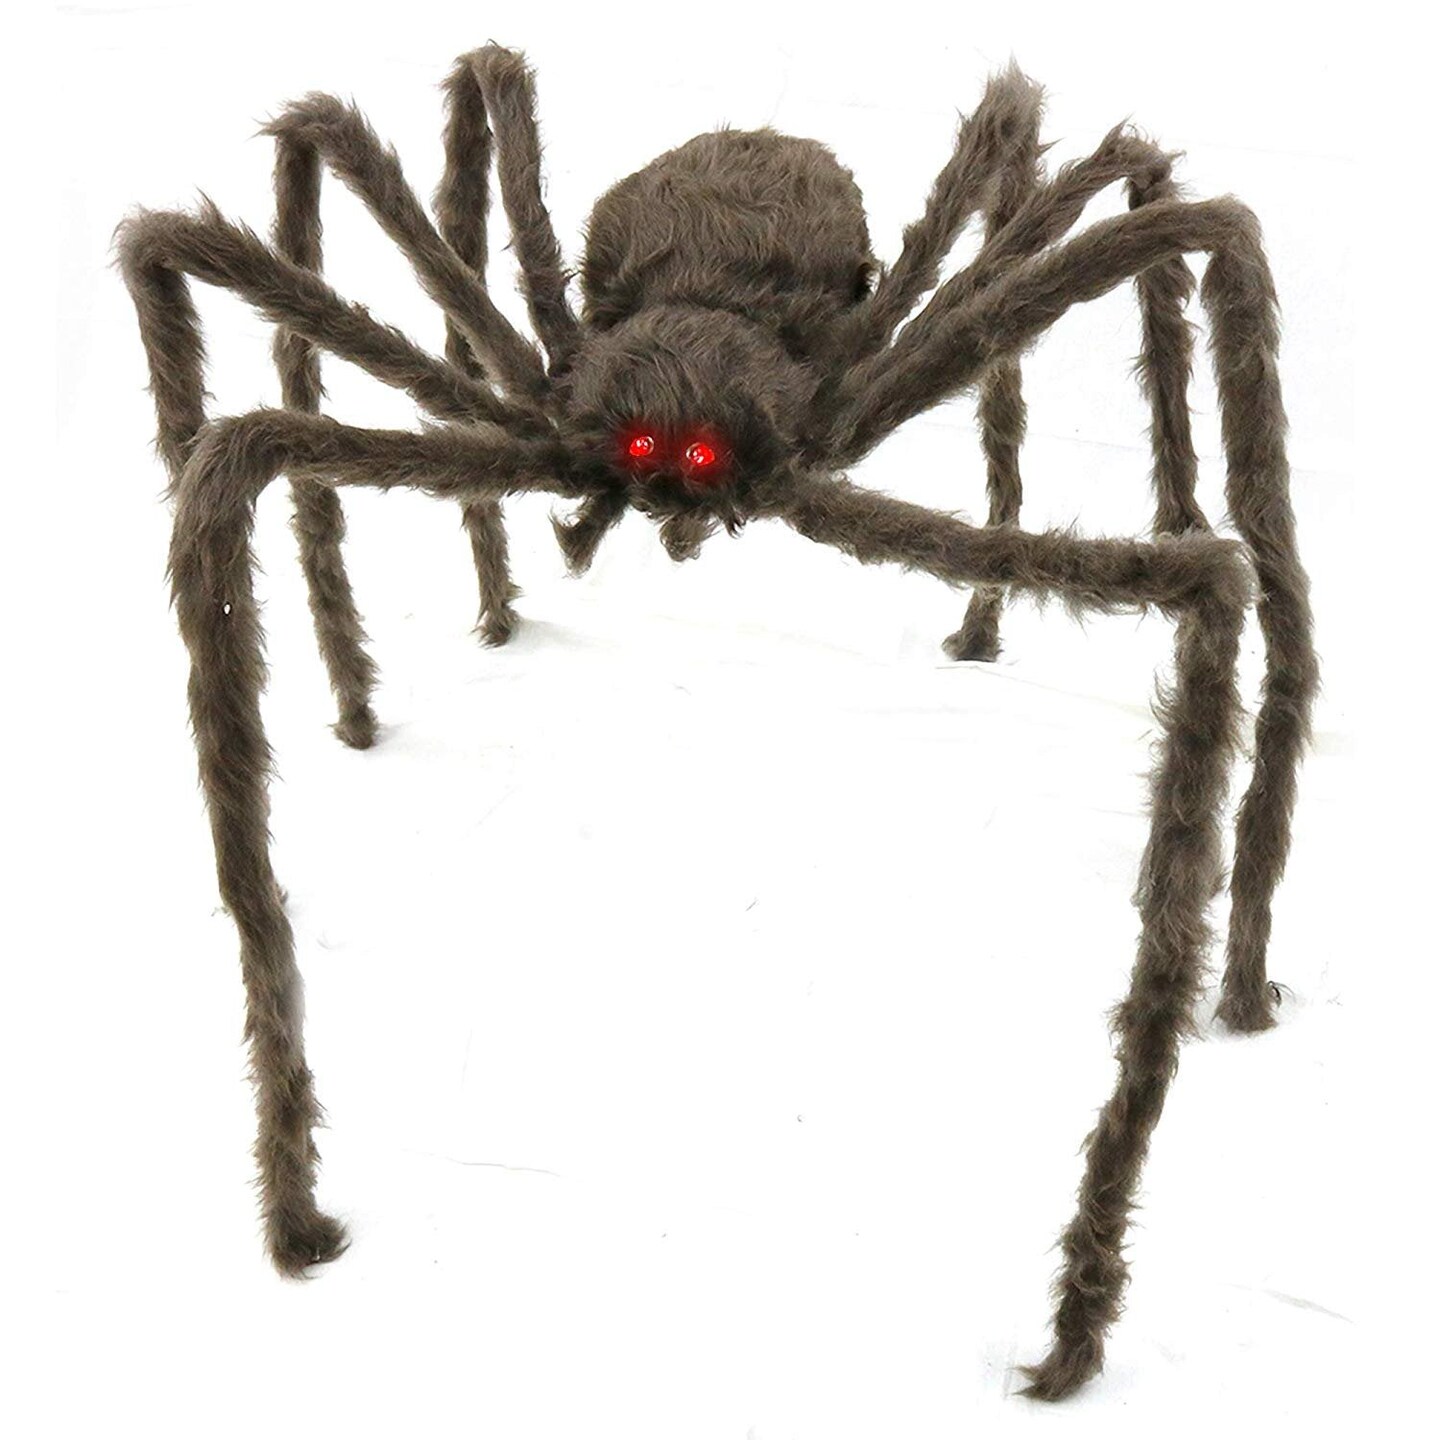 Big Mo&#x27;s Toys Creepy Spider - Hairy Real Look Tarantula Spider with Red LED Eyes - 1 Piece